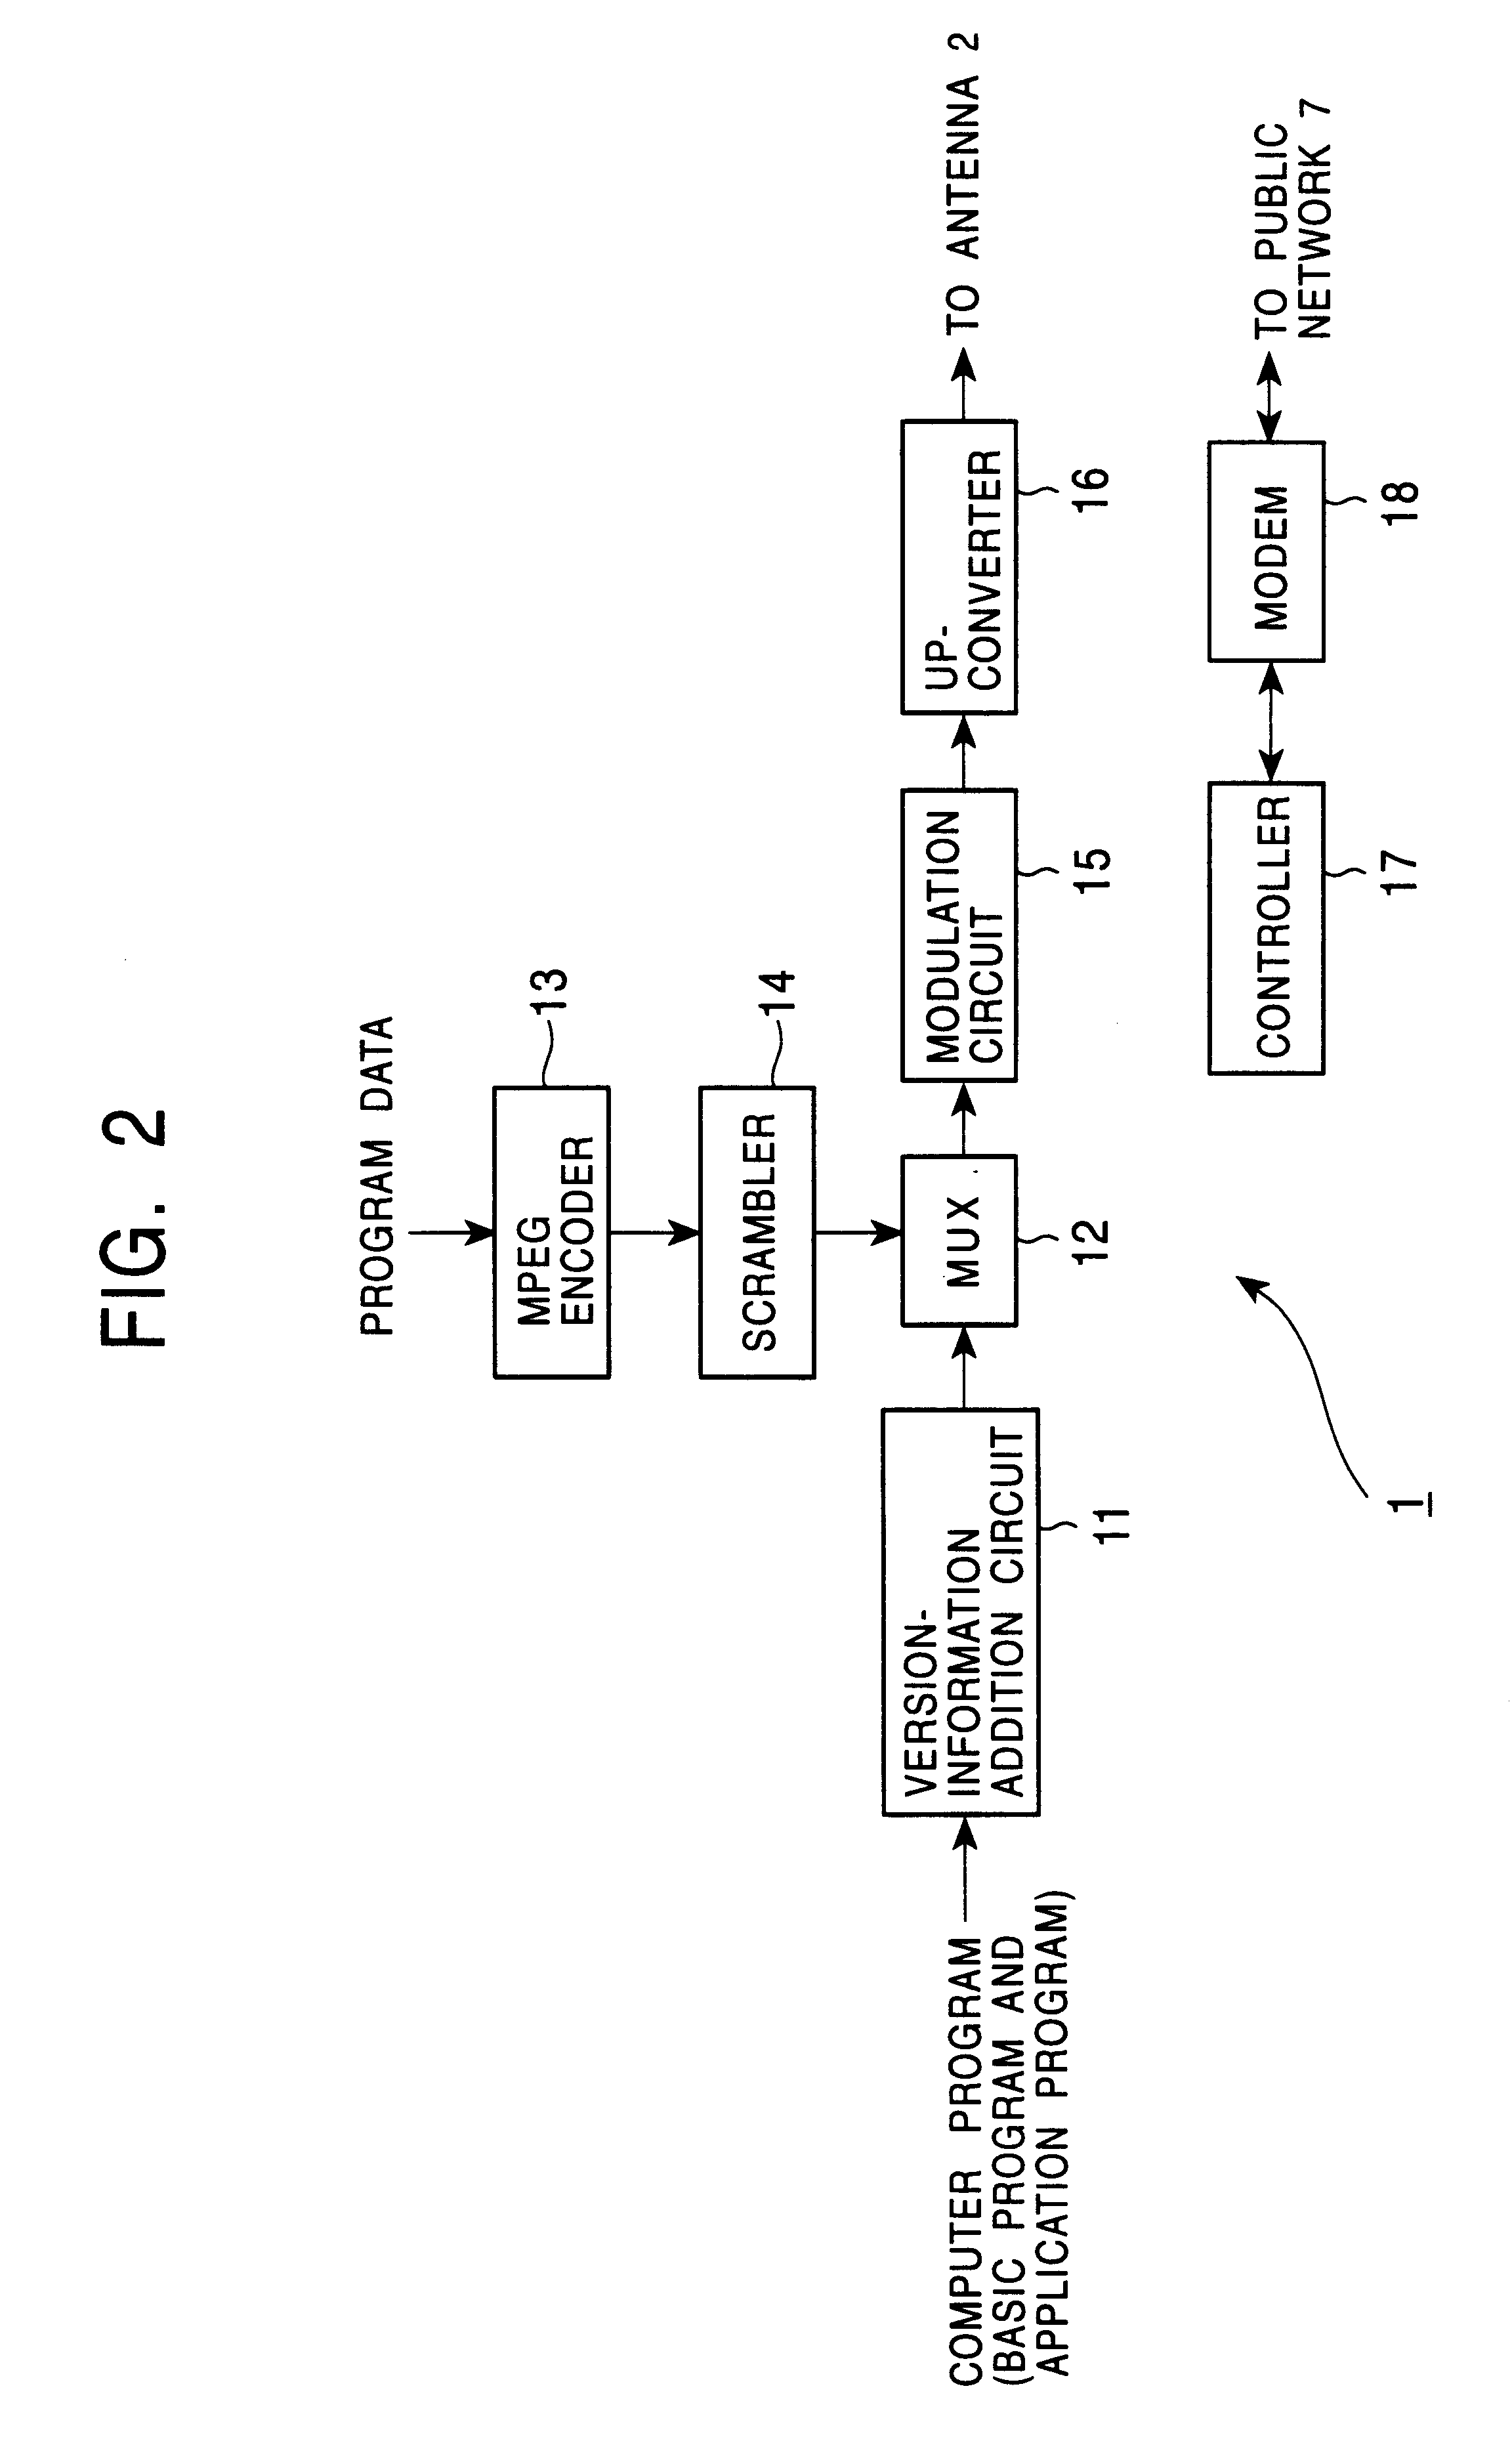 Method and apparatus for determining compatibility of computer programs